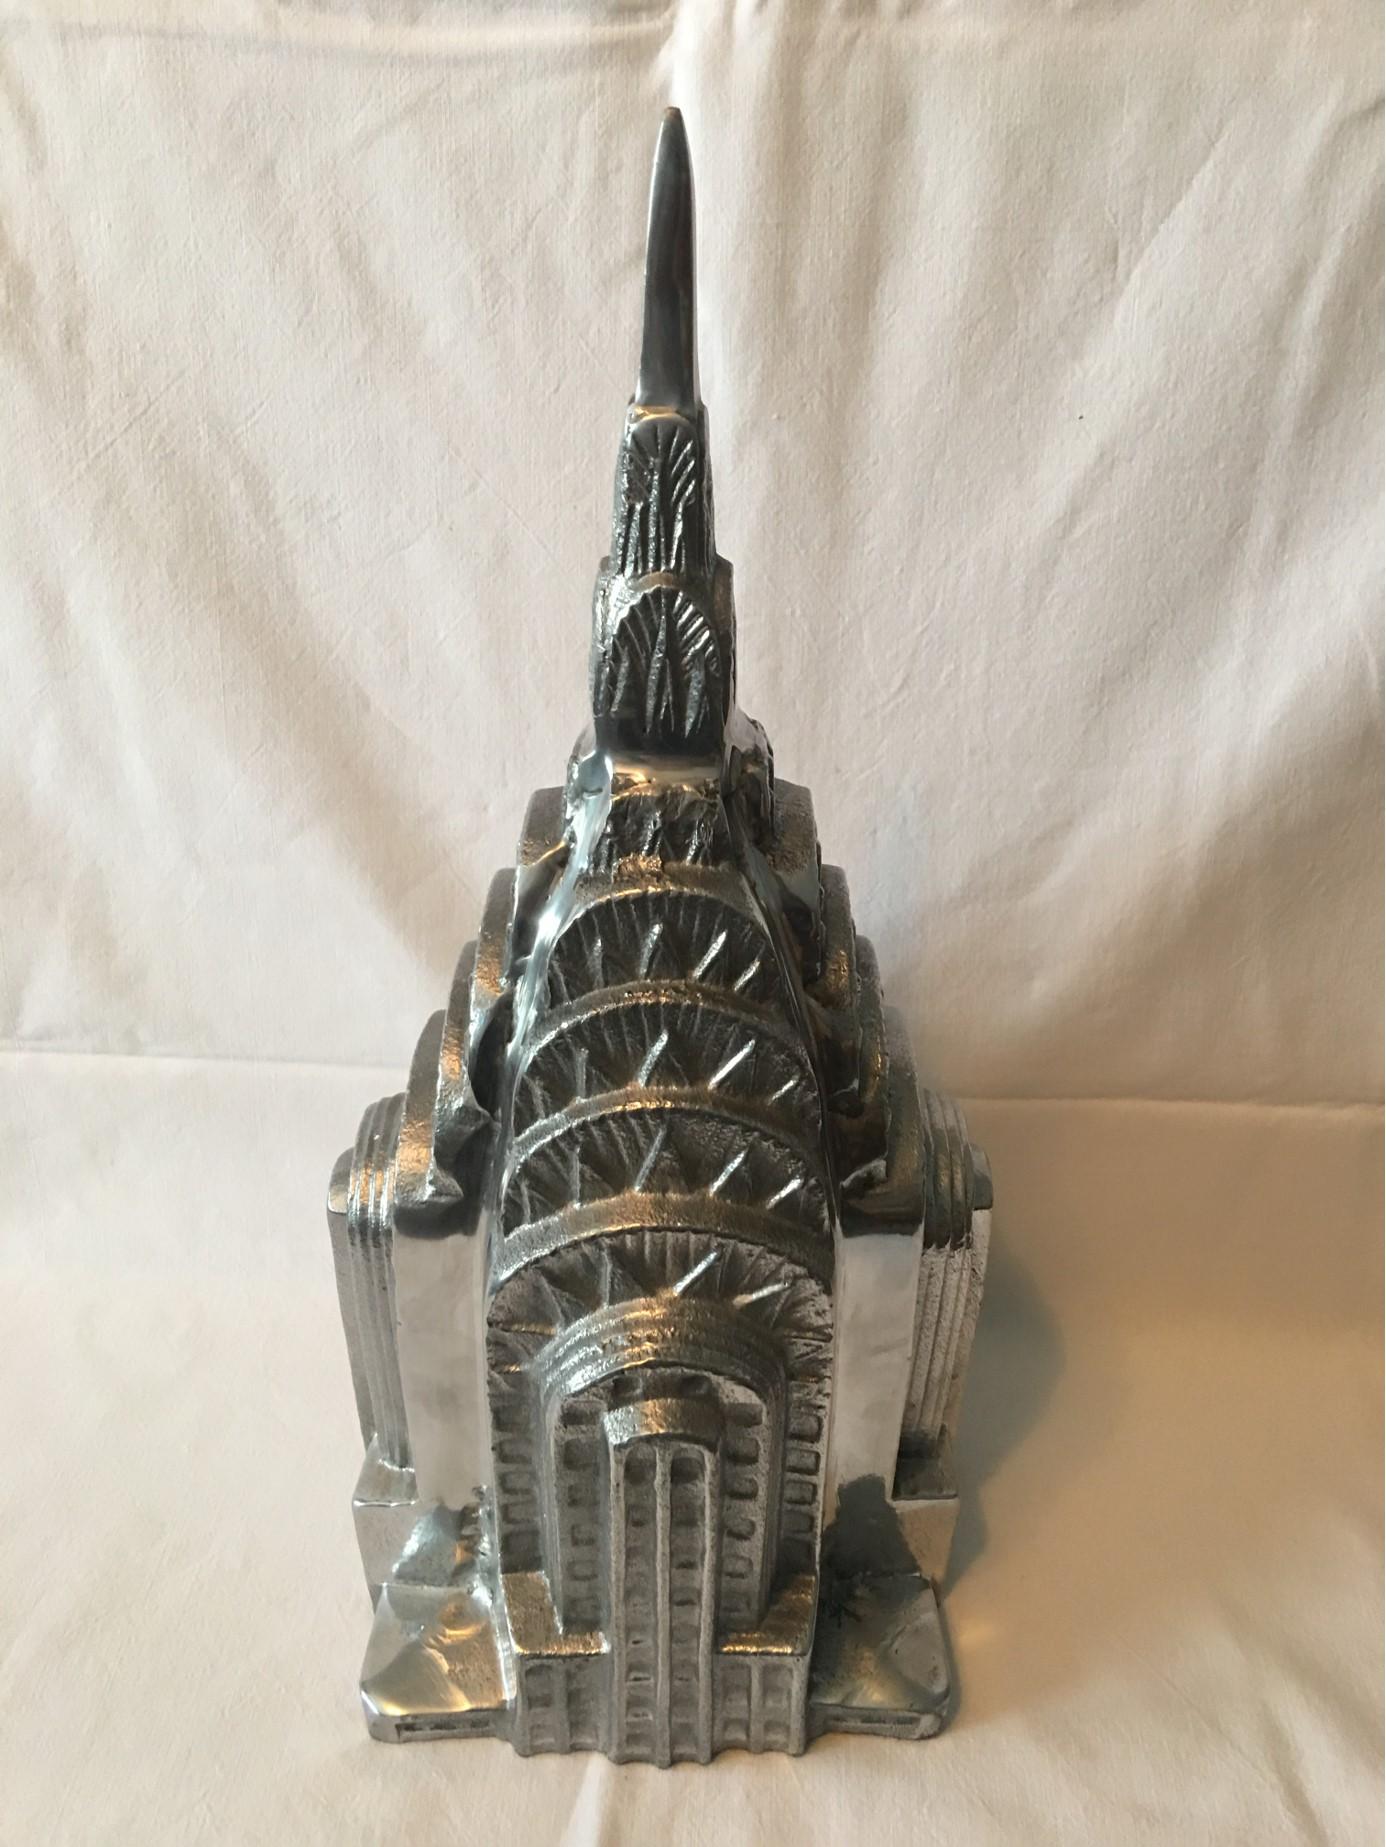  New York Souvenir Chrysler Building Top Made of Aluminum from the 1970s 1